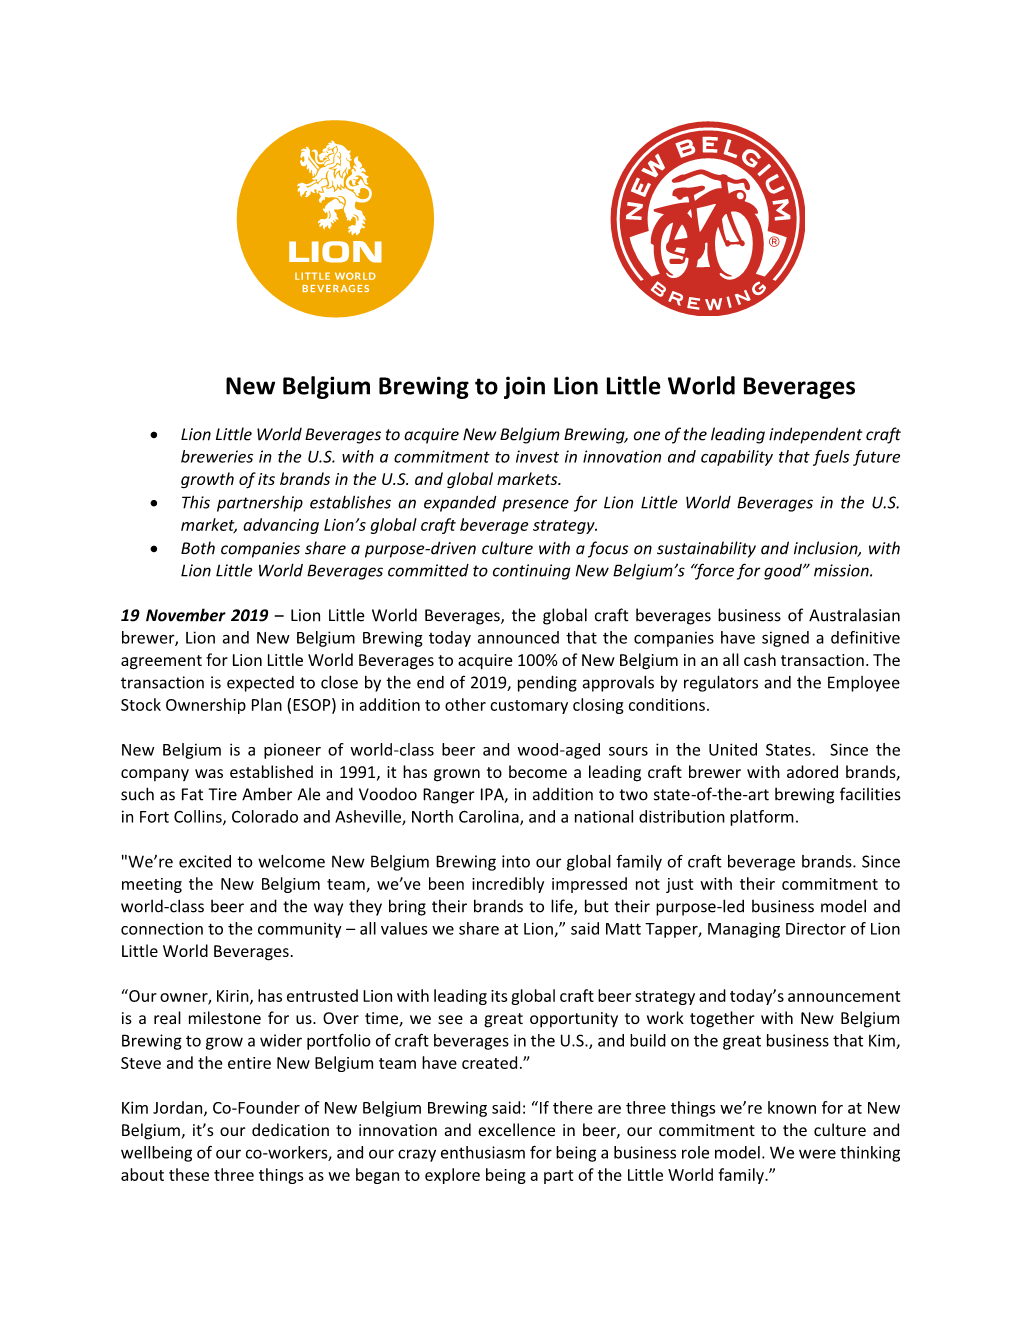 New Belgium Brewing to Join Lion Little World Beverages